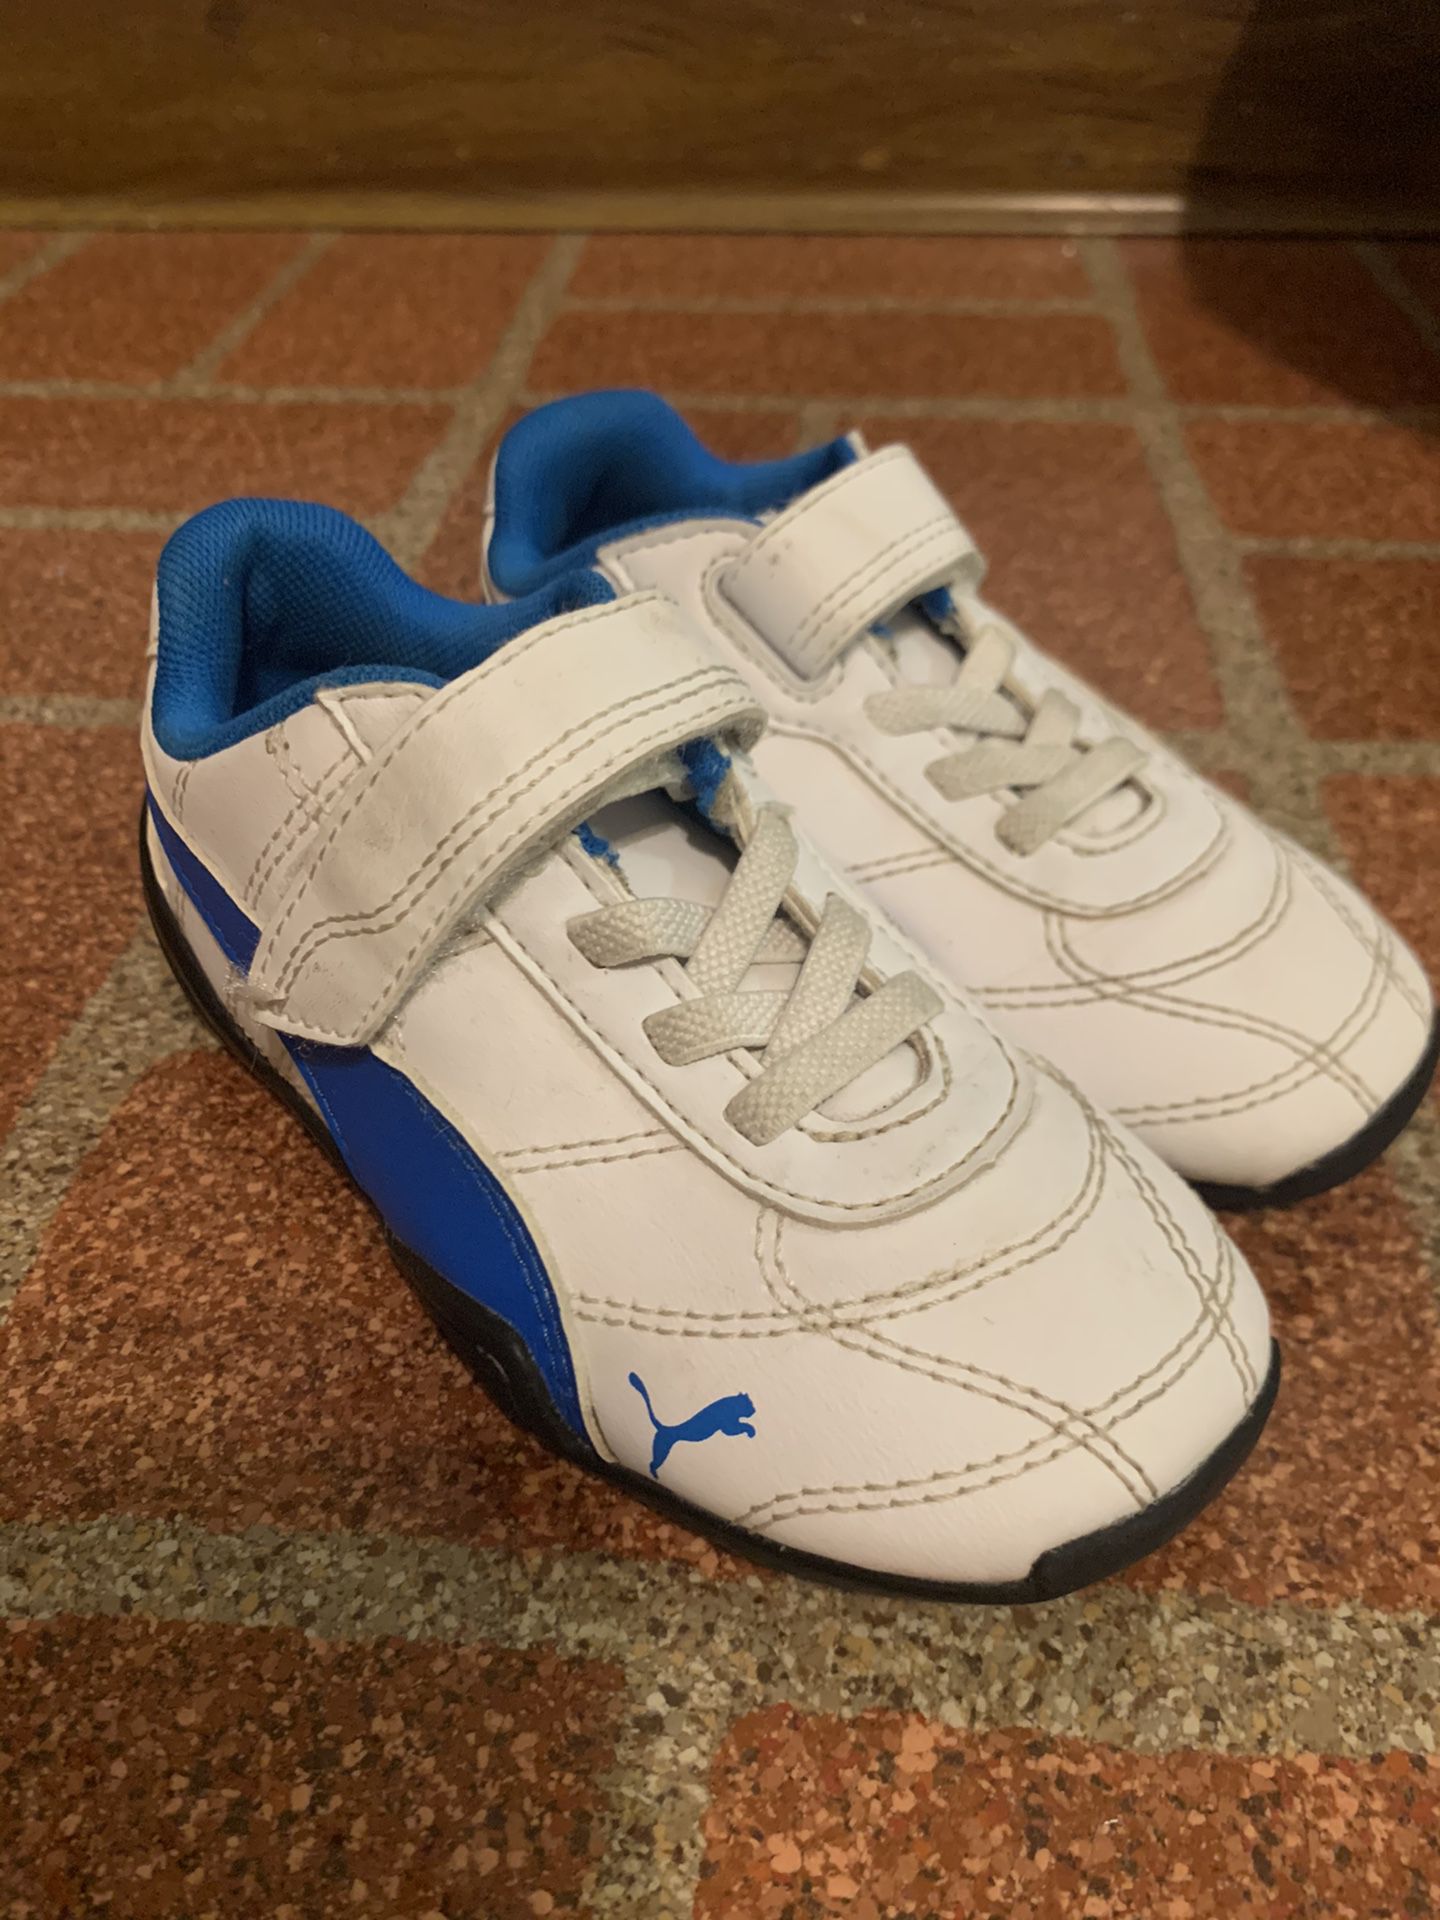 Toddler boys shoes Size 8